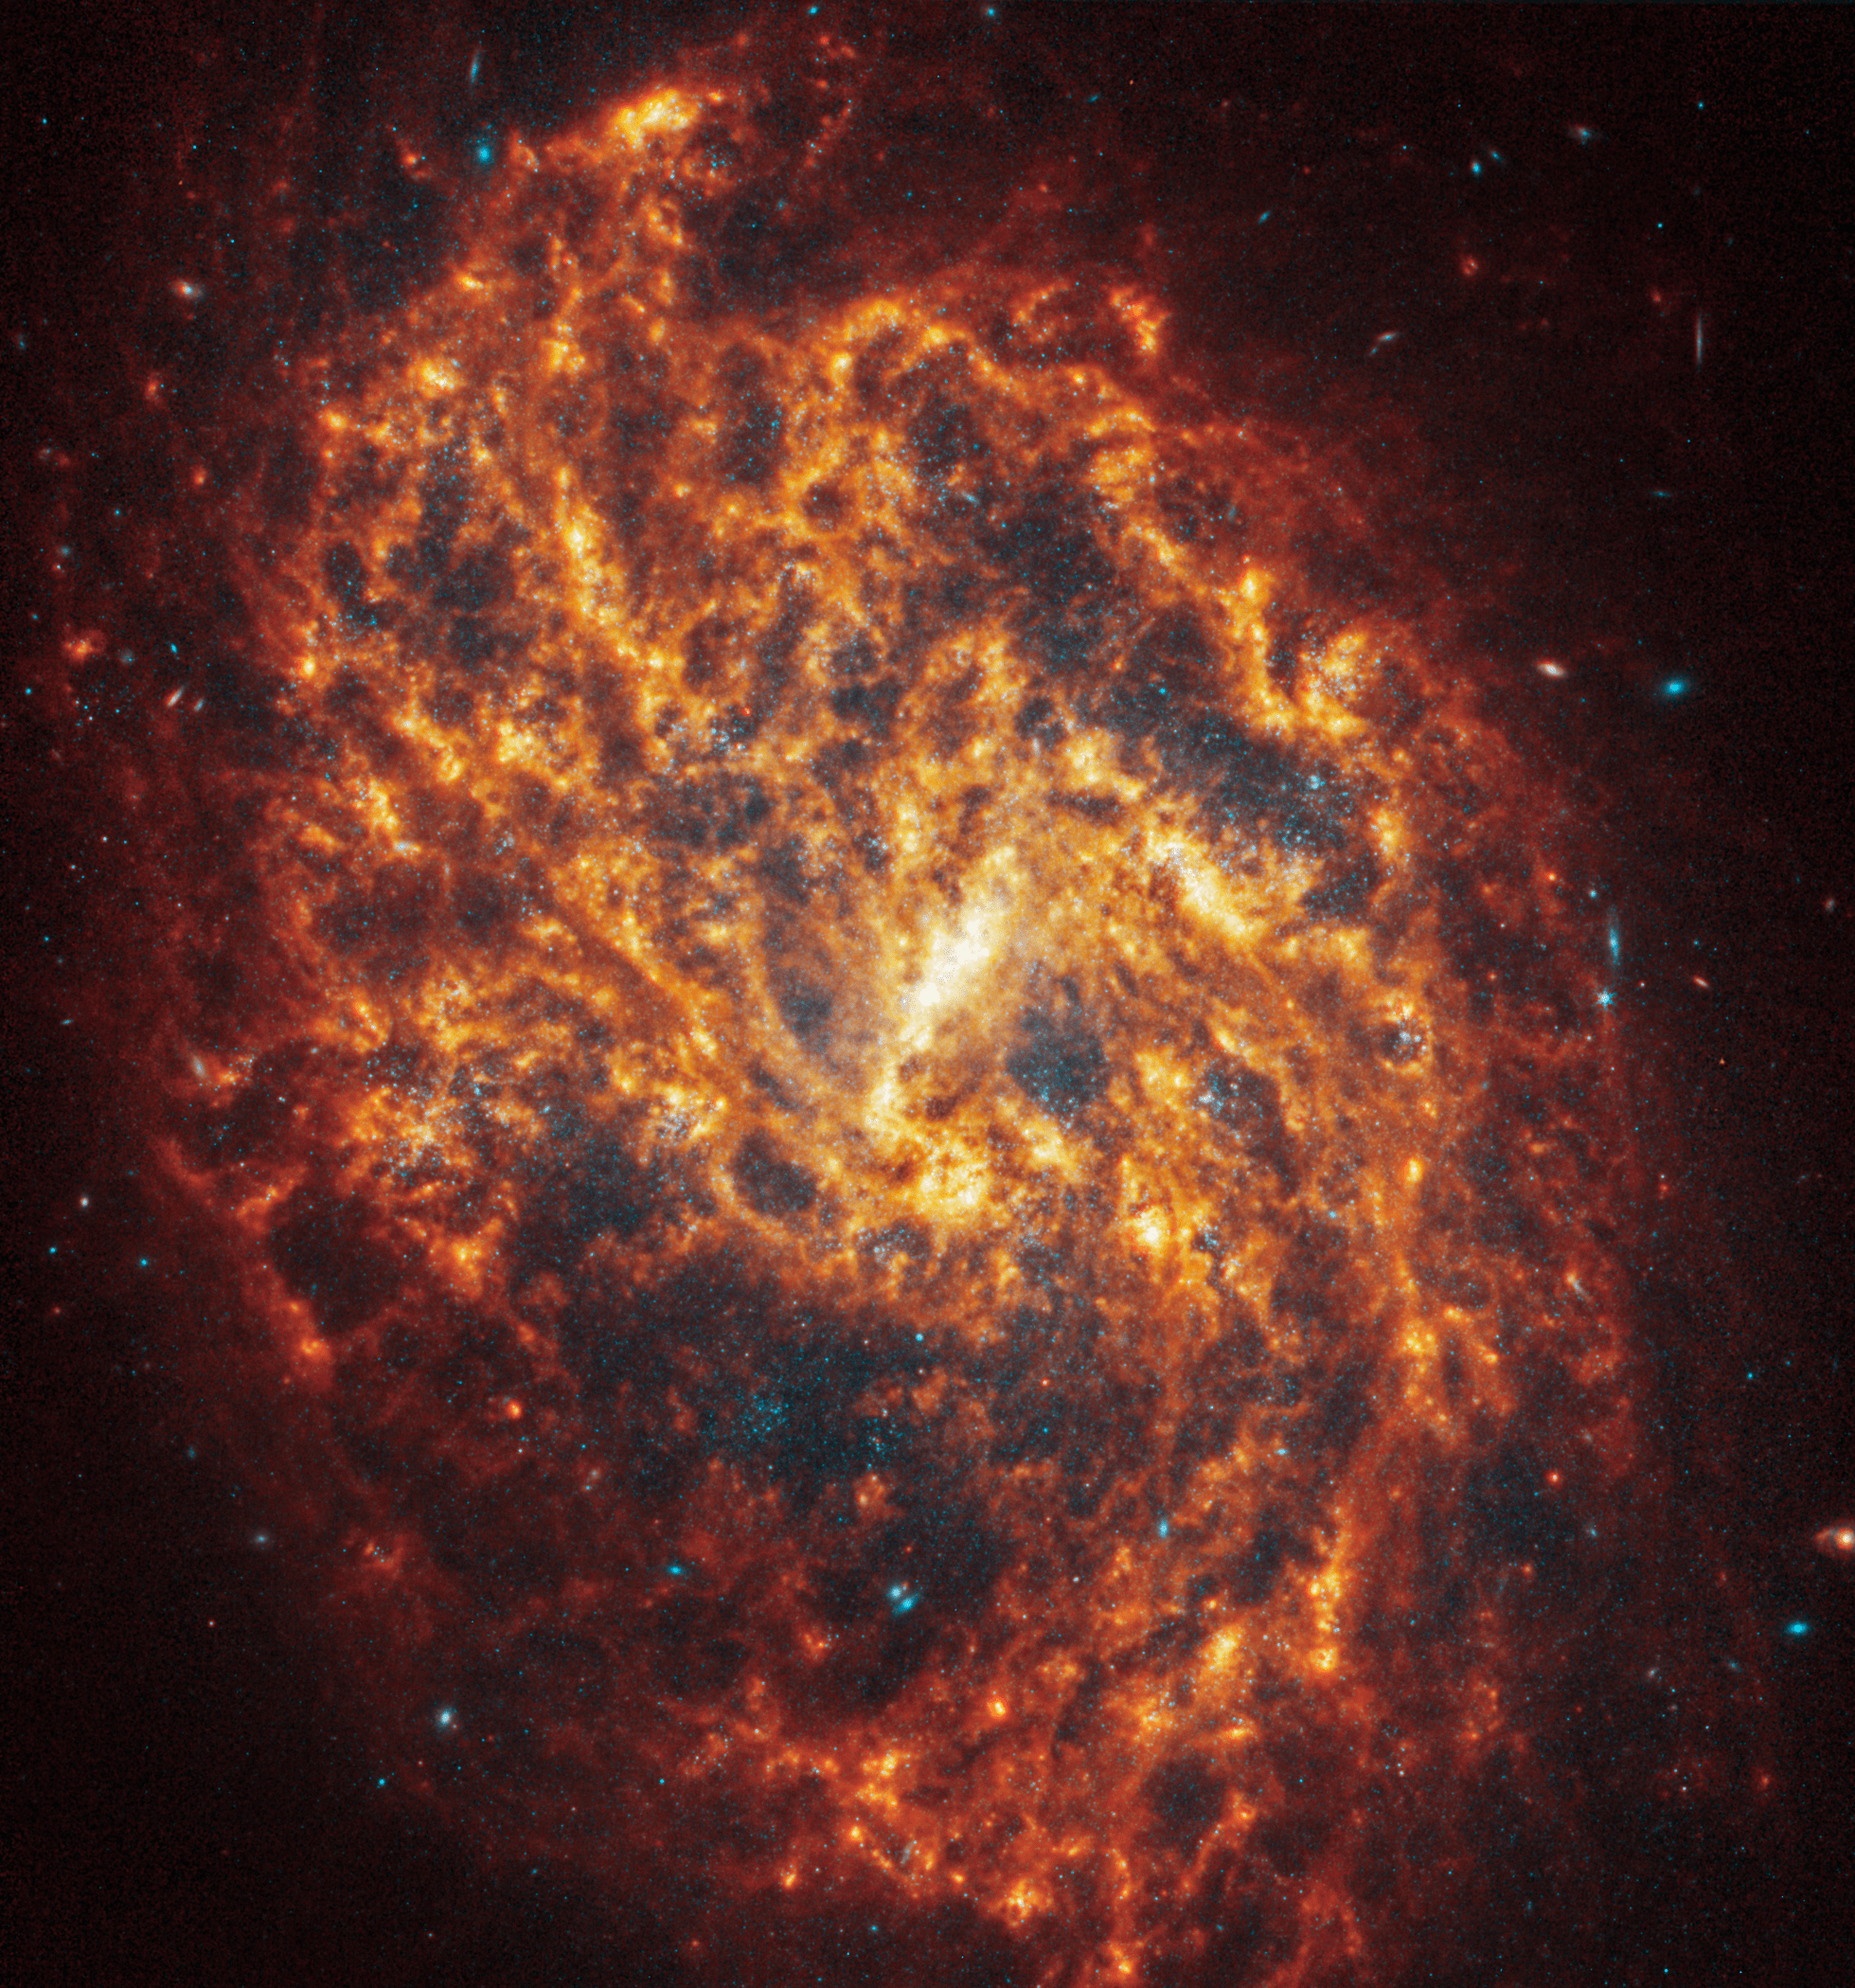 Webb’s image of NGC 1087 shows a densely populated face-on spiral galaxy anchored by its central region, which takes the shape of a short light yellow line that is about a fifth of the length of the galaxy. Filamentary spiral arms made of stars, gas, and dust start at the center and extend to the top and bottom edges, rotating clockwise. There is so much light in this region that the spiral arms of the galaxy look muddled. They are largely orange, ranging from dark to bright orange. Scattered across the packed scene are some bright blue pinpoints of light, but they appear more clearly in areas where it is dark gray or black. Several smaller “bubbles” where it’s black appears throughout the galaxy. The edges of the scene are dark black and there are some larger bright blue points of light, along with a few pink shapes, likely background galaxies.